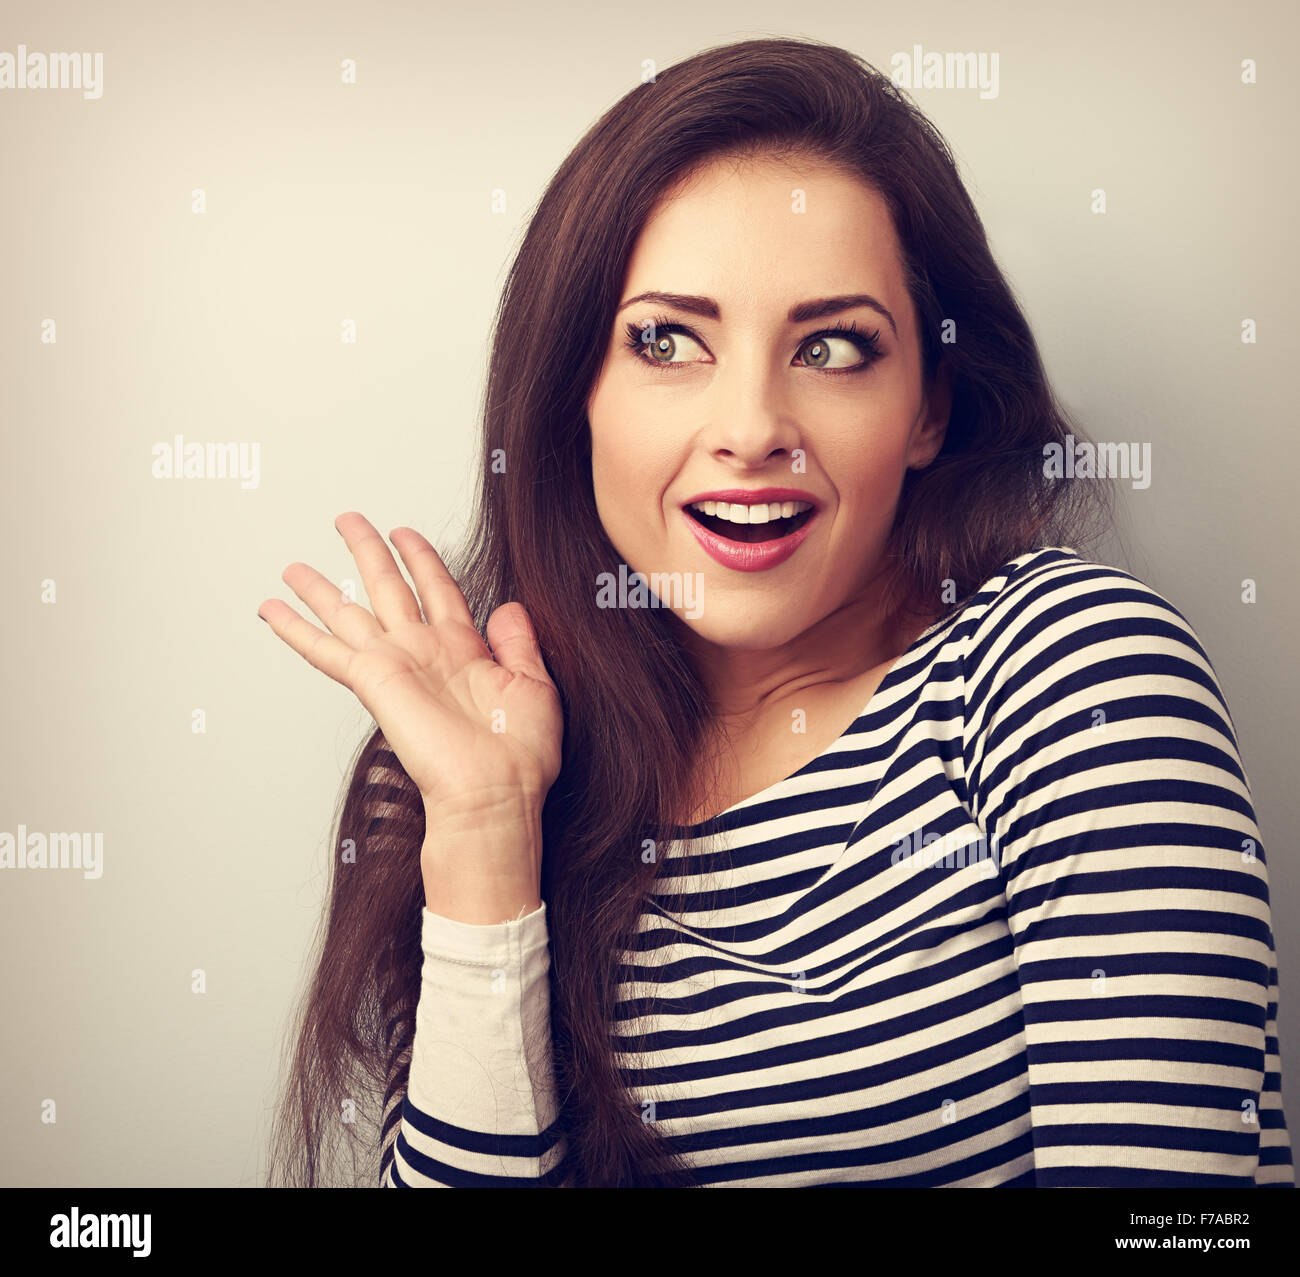 Excited beautiful woman surprising and looking. Woman with open mouth and gesturing hand. Closeup vintage portrait Stock Photo